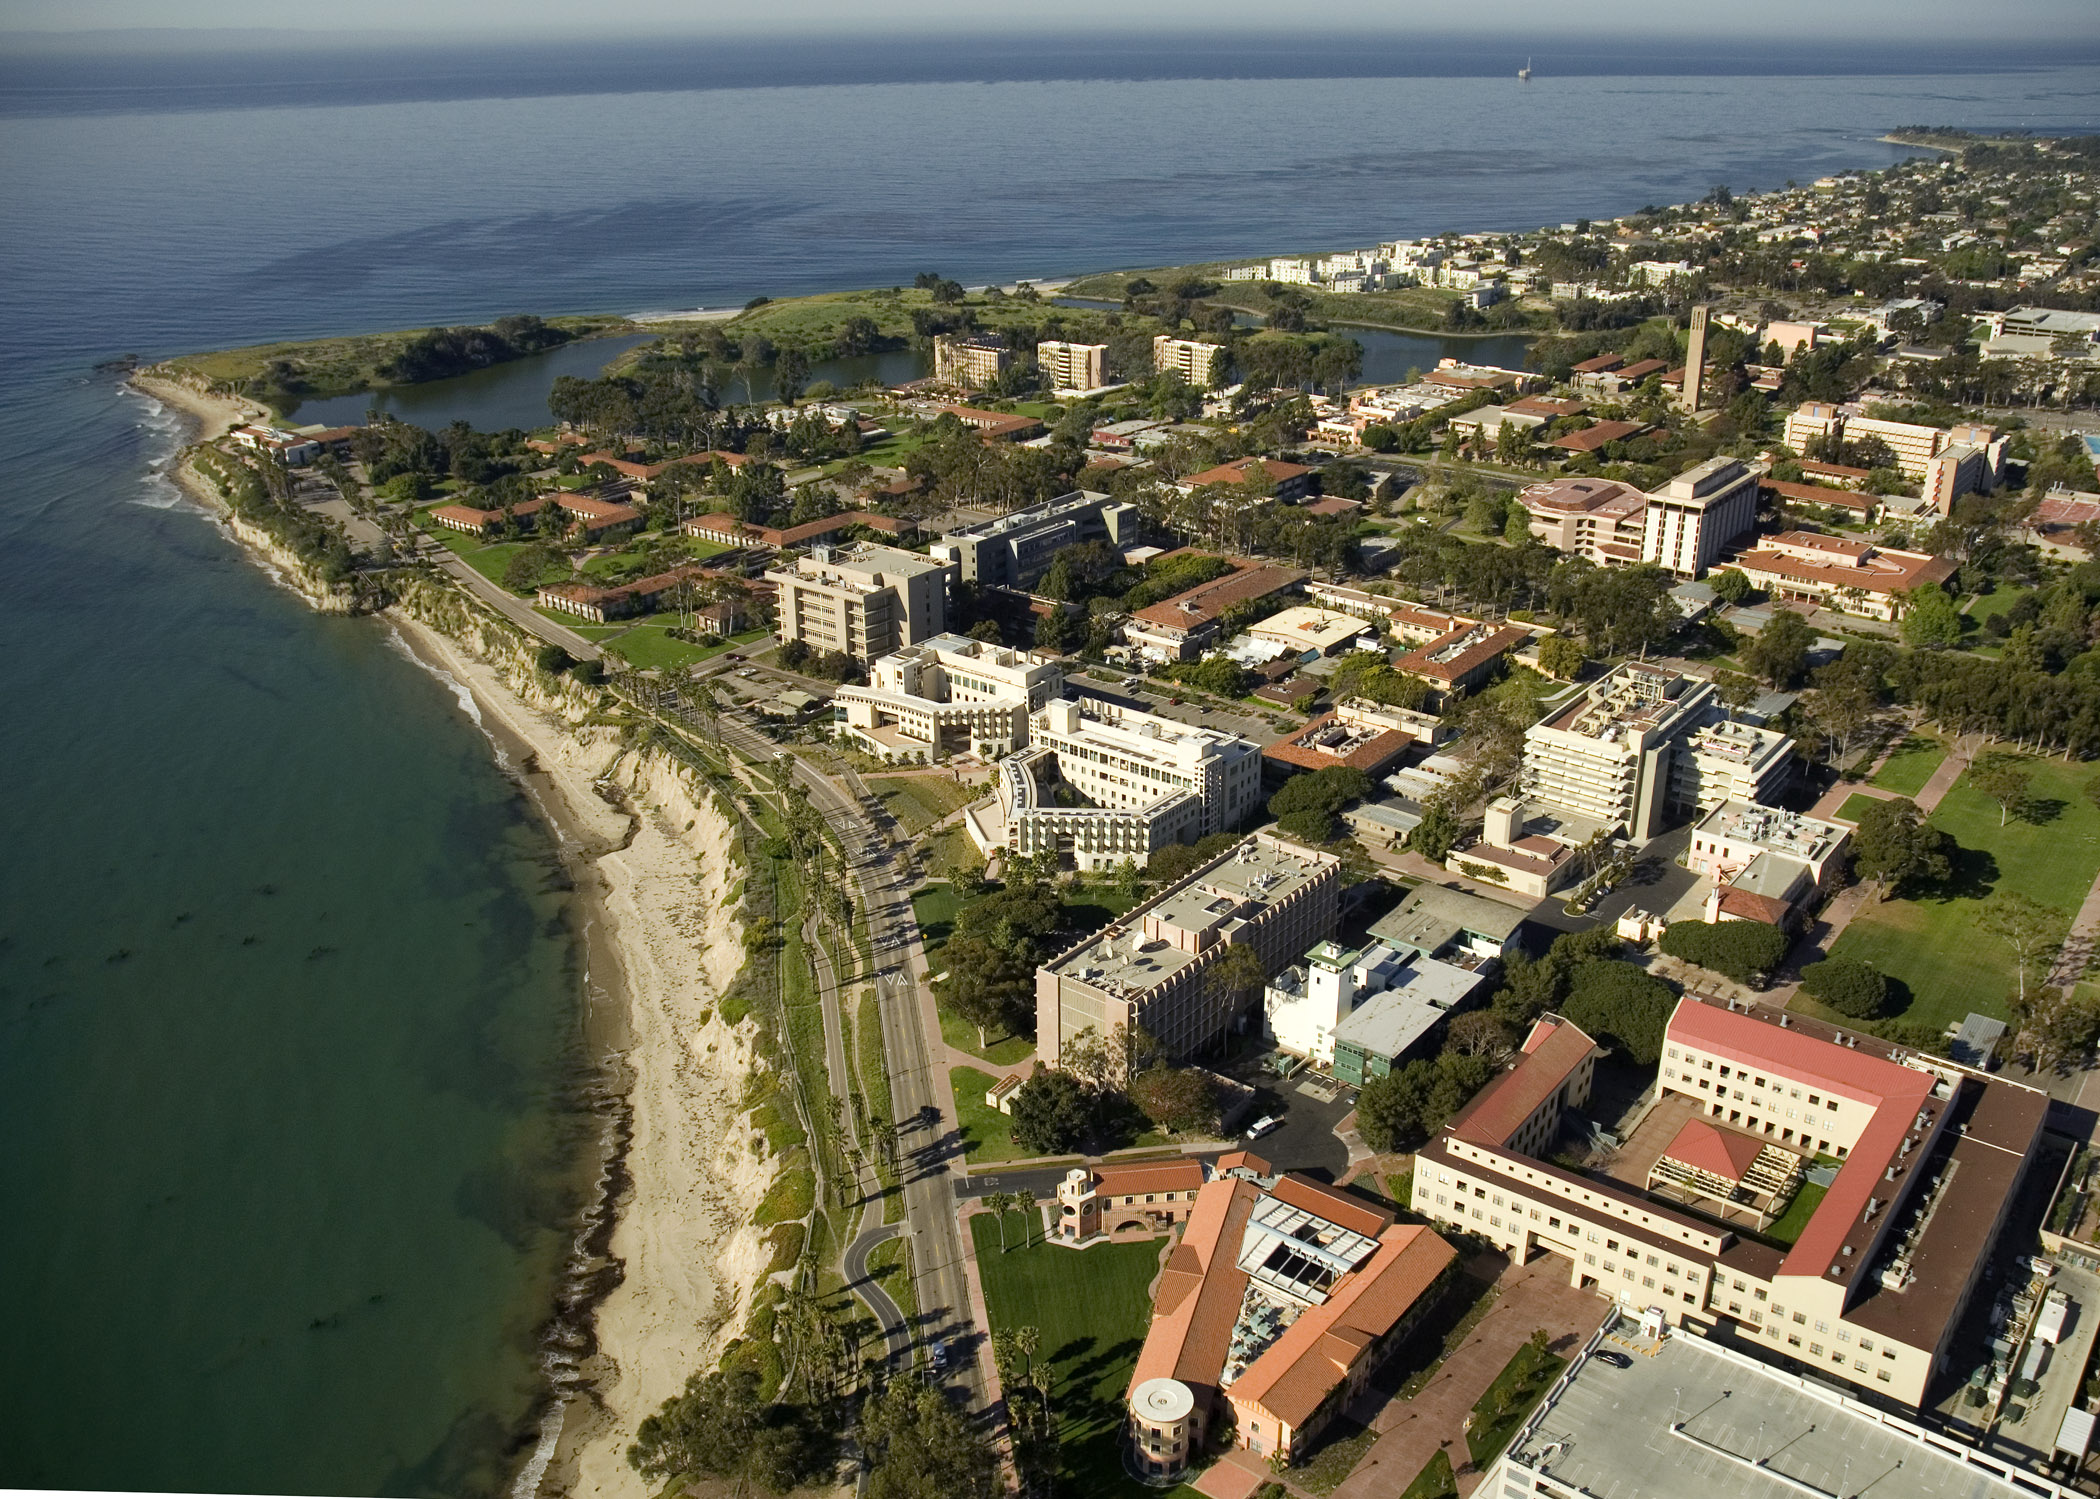 Students Allege Poor Working Conditions at UCSB’s Annual Fund The